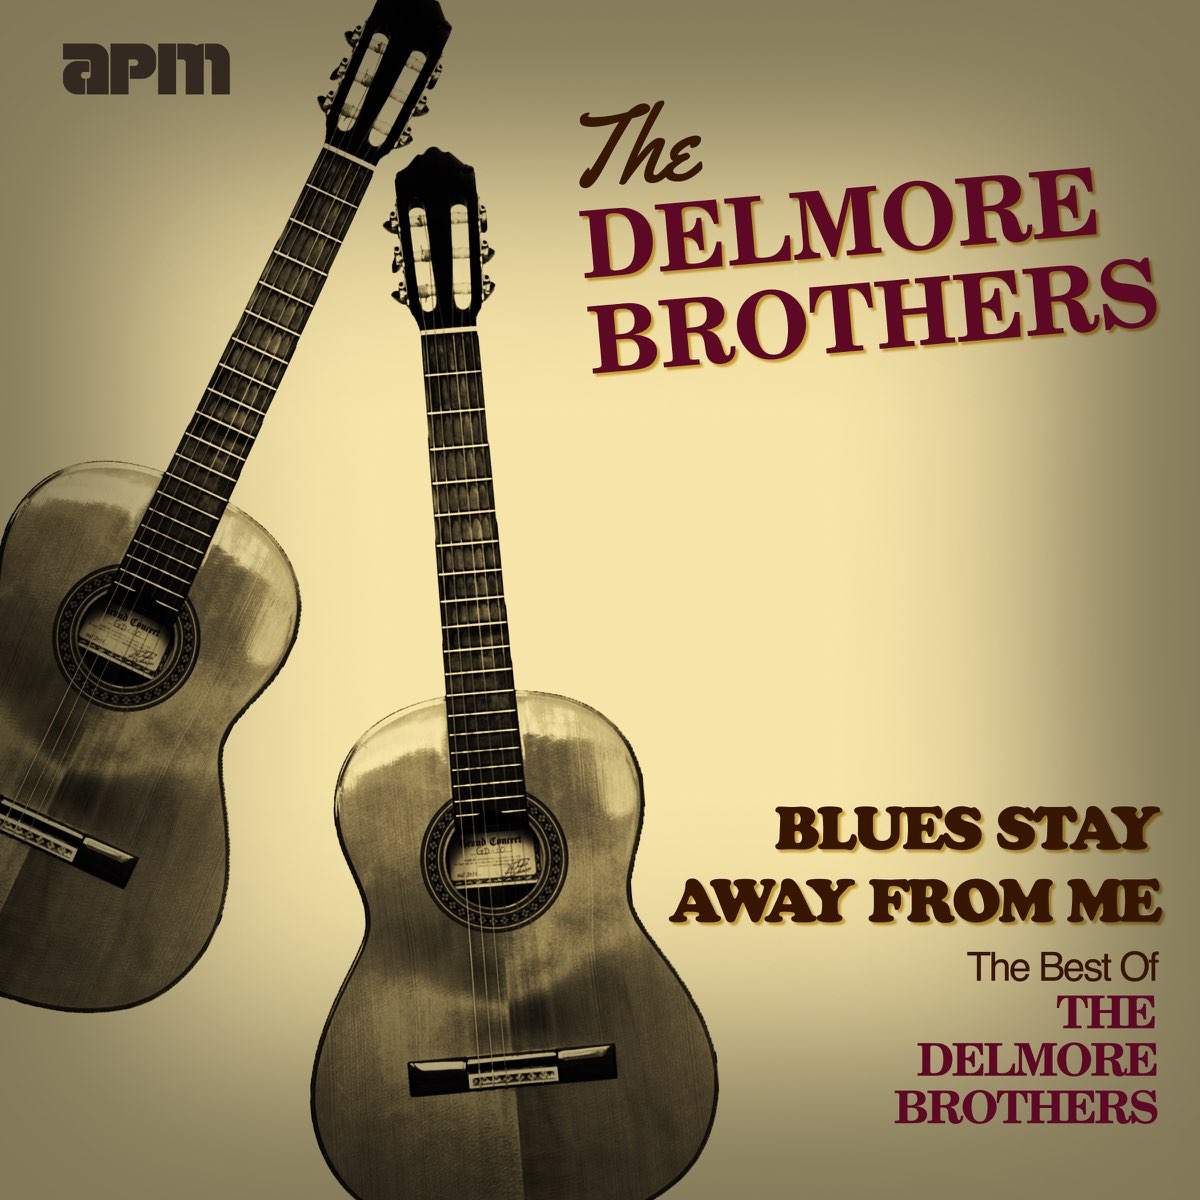 Брату 50 песни. Delmore. Делмора. The Delmore brothers Blues stay away from me Country Music experience.